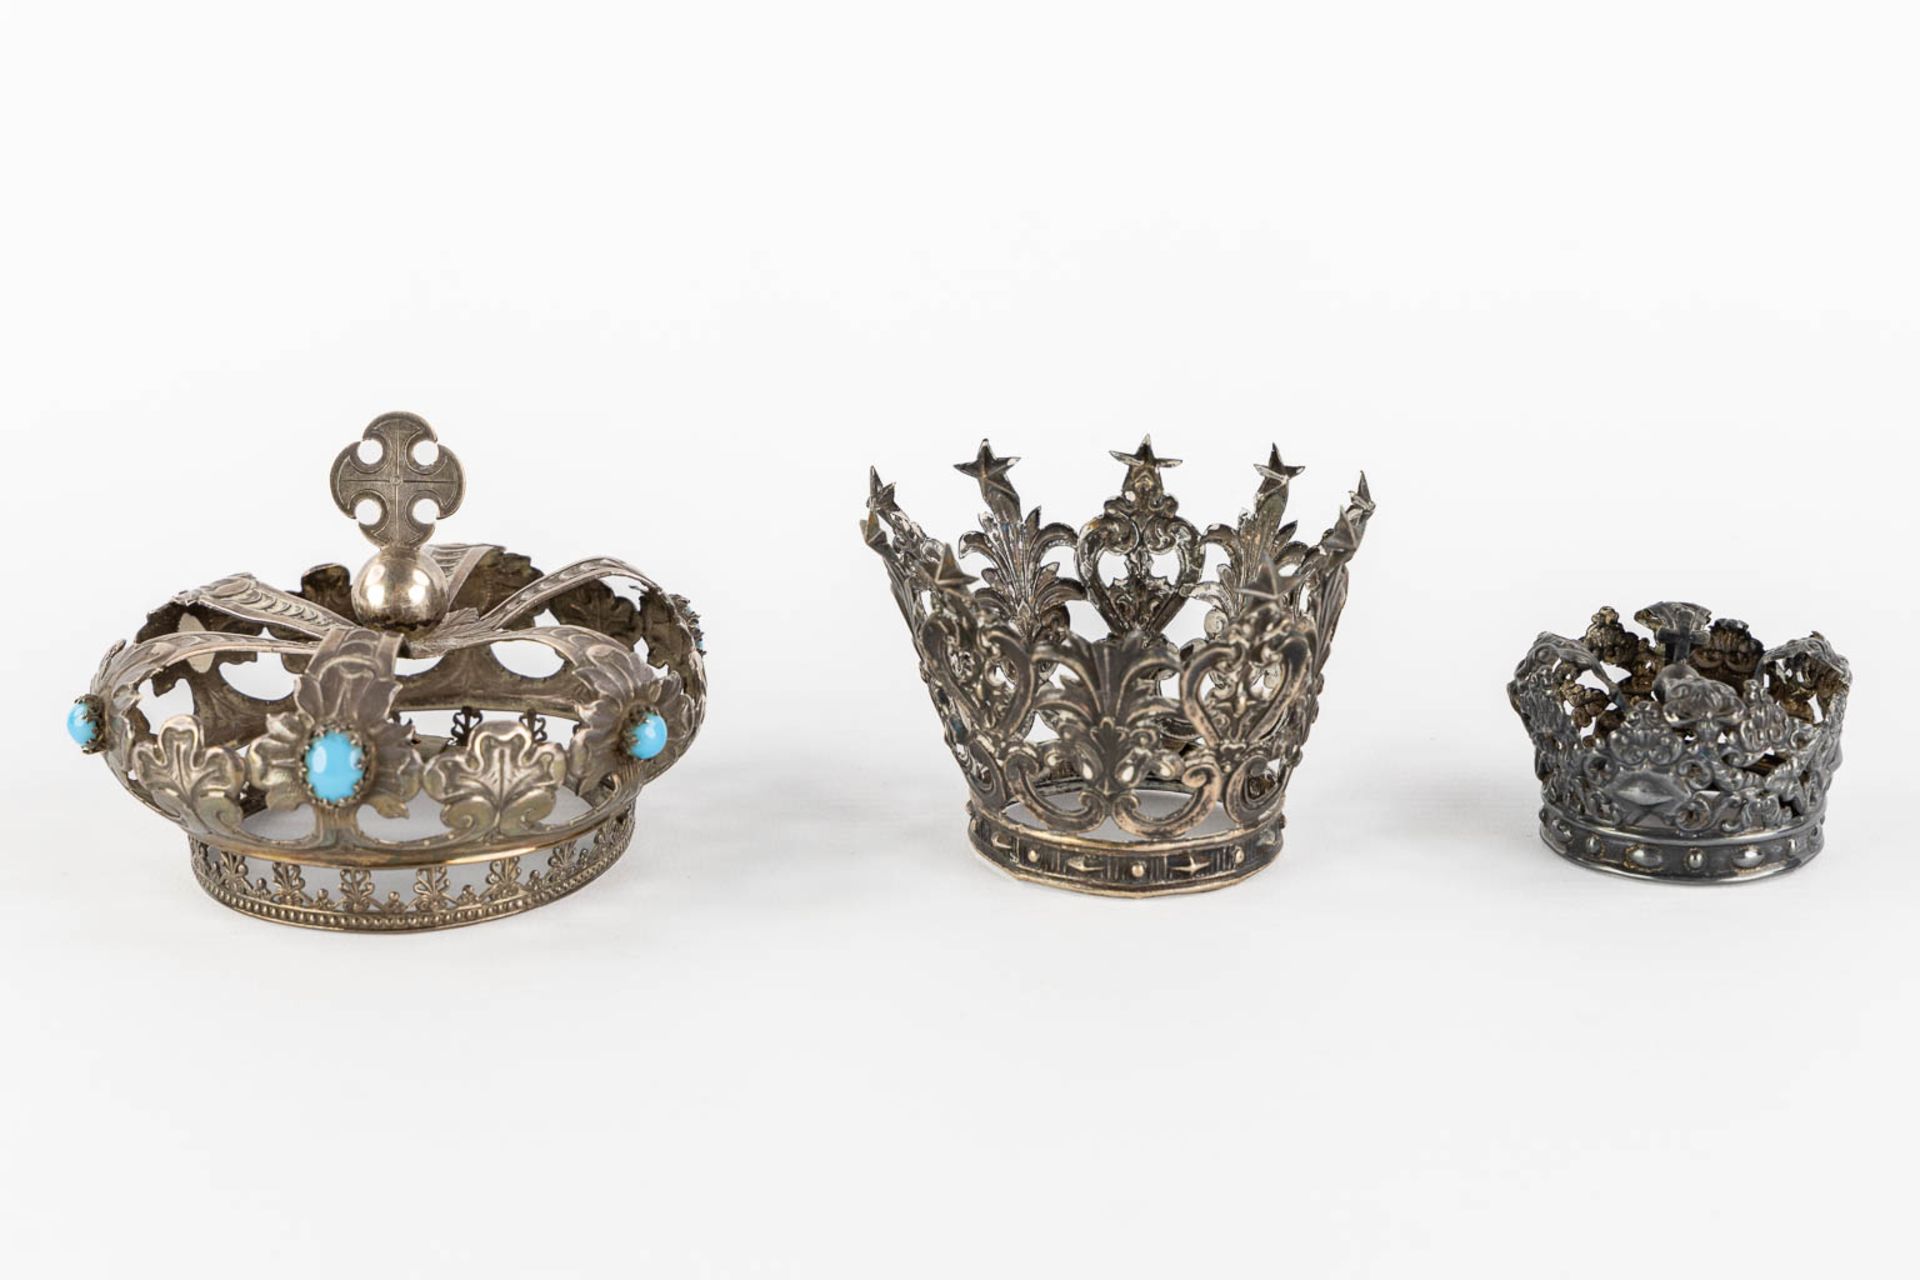 4 silver crowns and a sceptre, added a fabric crown. 211g. (L:33,5 cm) - Bild 6 aus 8